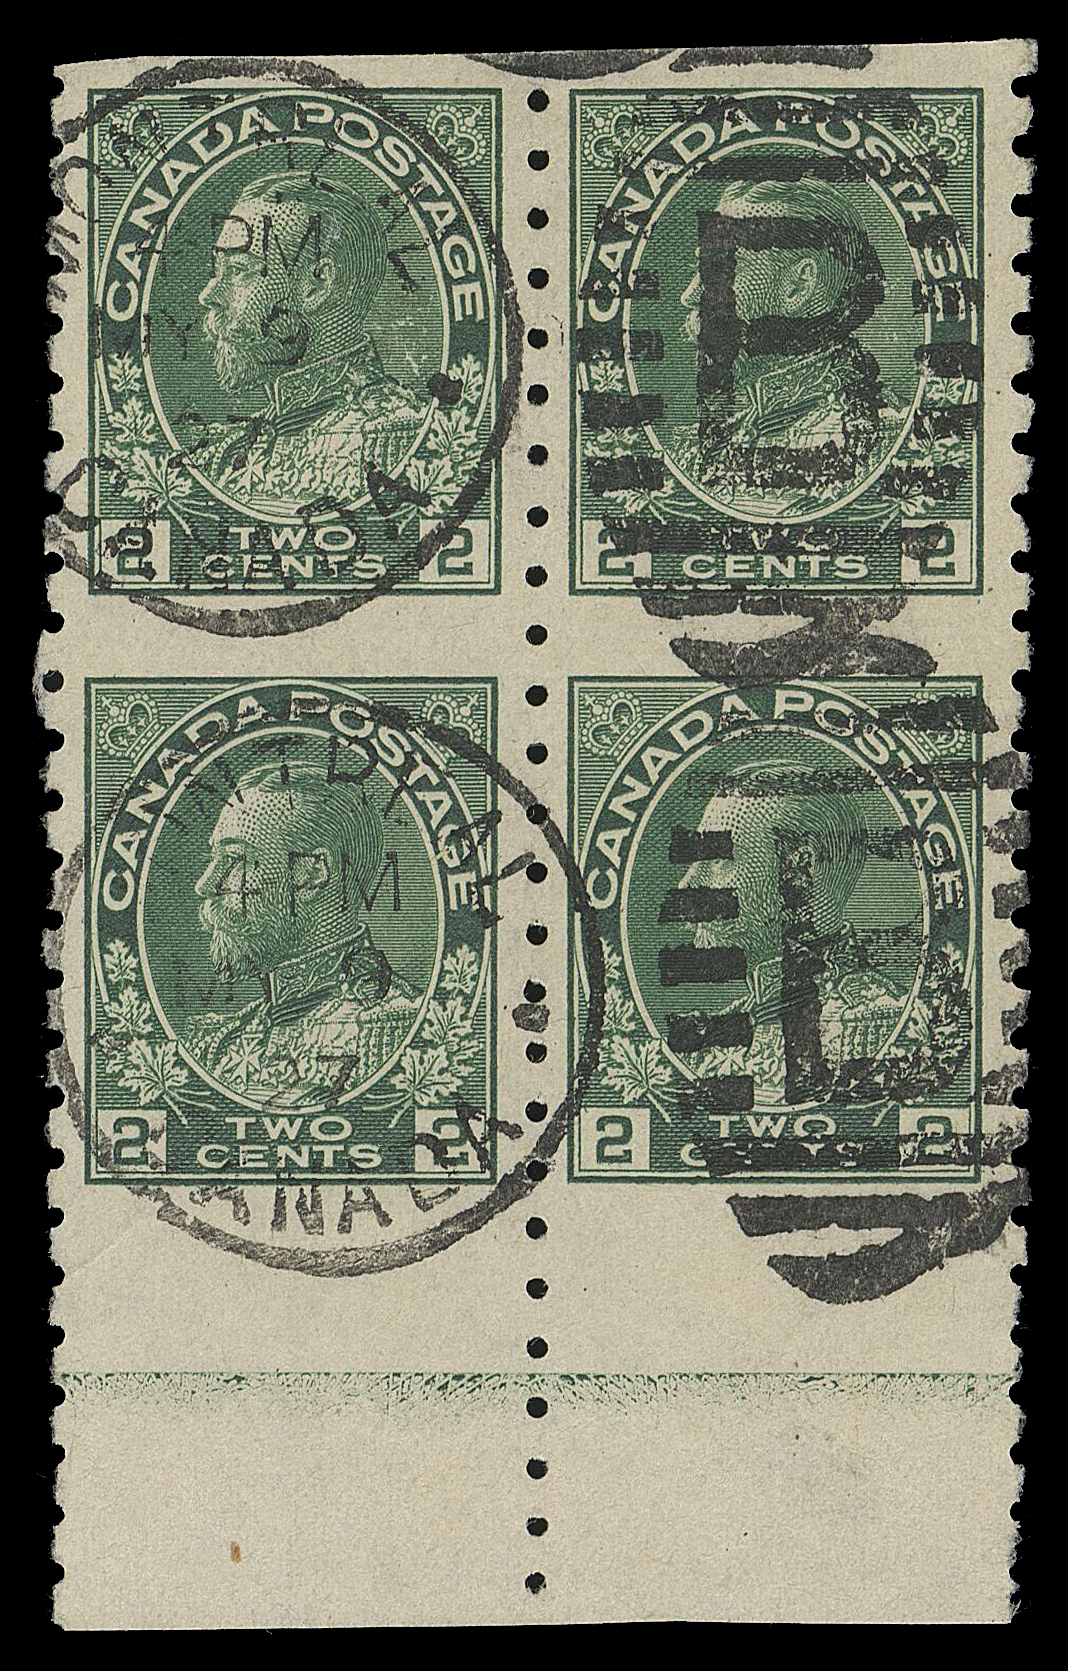 ADMIRAL STAMPS  128ai,Well centered used block imperforate horizontally, couple negligible nibbed perfs at lower right, displaying normal strength Type D lathework, neatly postmarked with Montreal MY 9 27 "B" duplex, very scarce, VF+